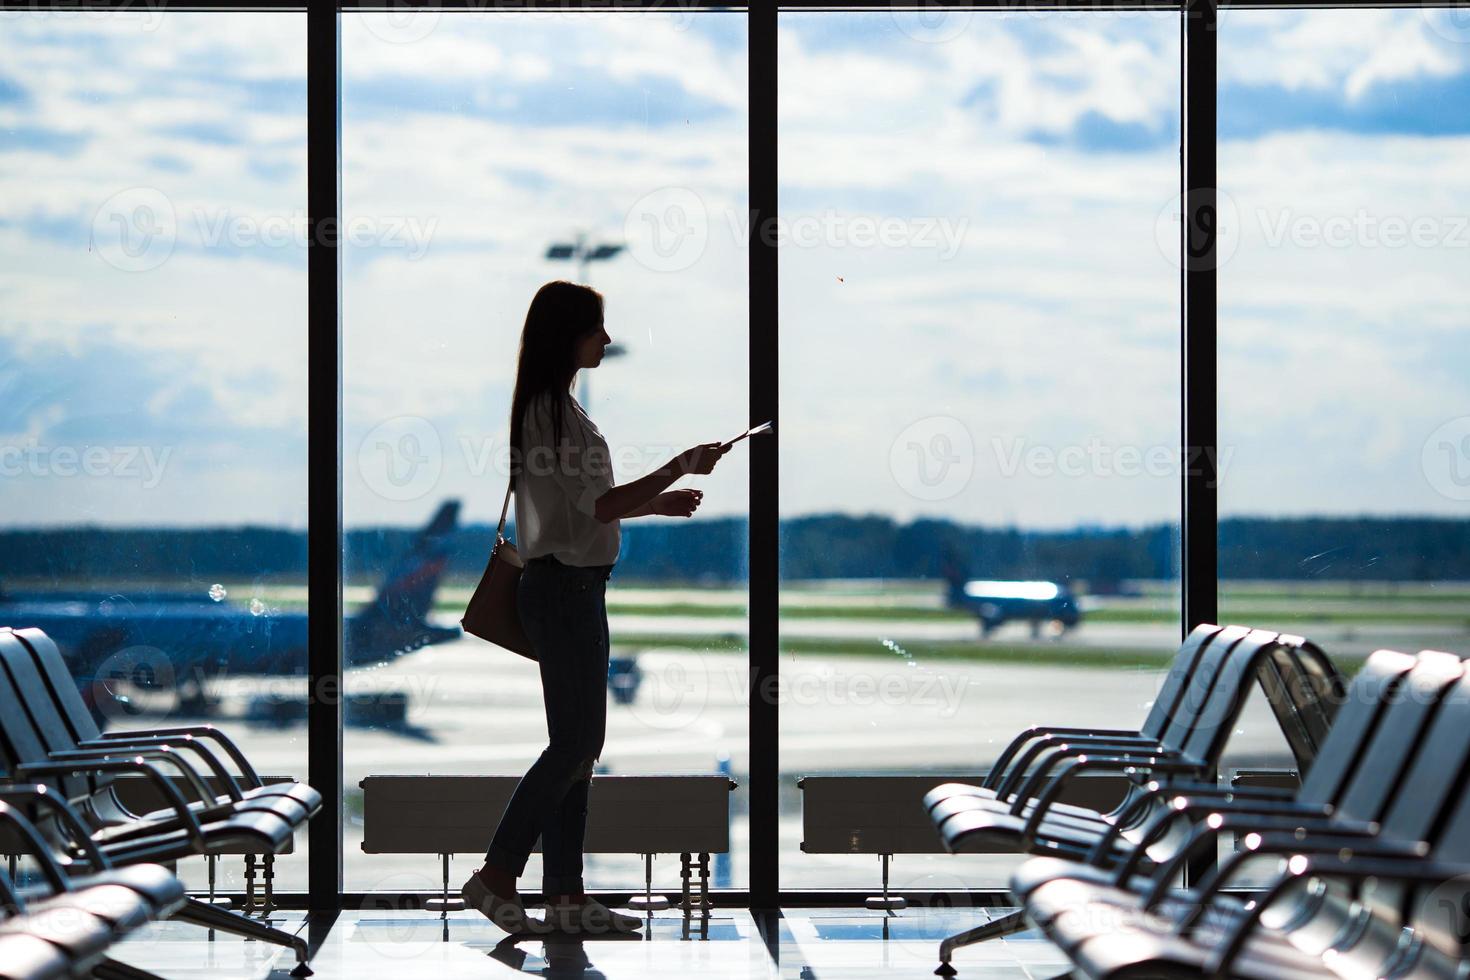 Silhouette of airline passenger in an airport lounge waiting for flight aircraft photo